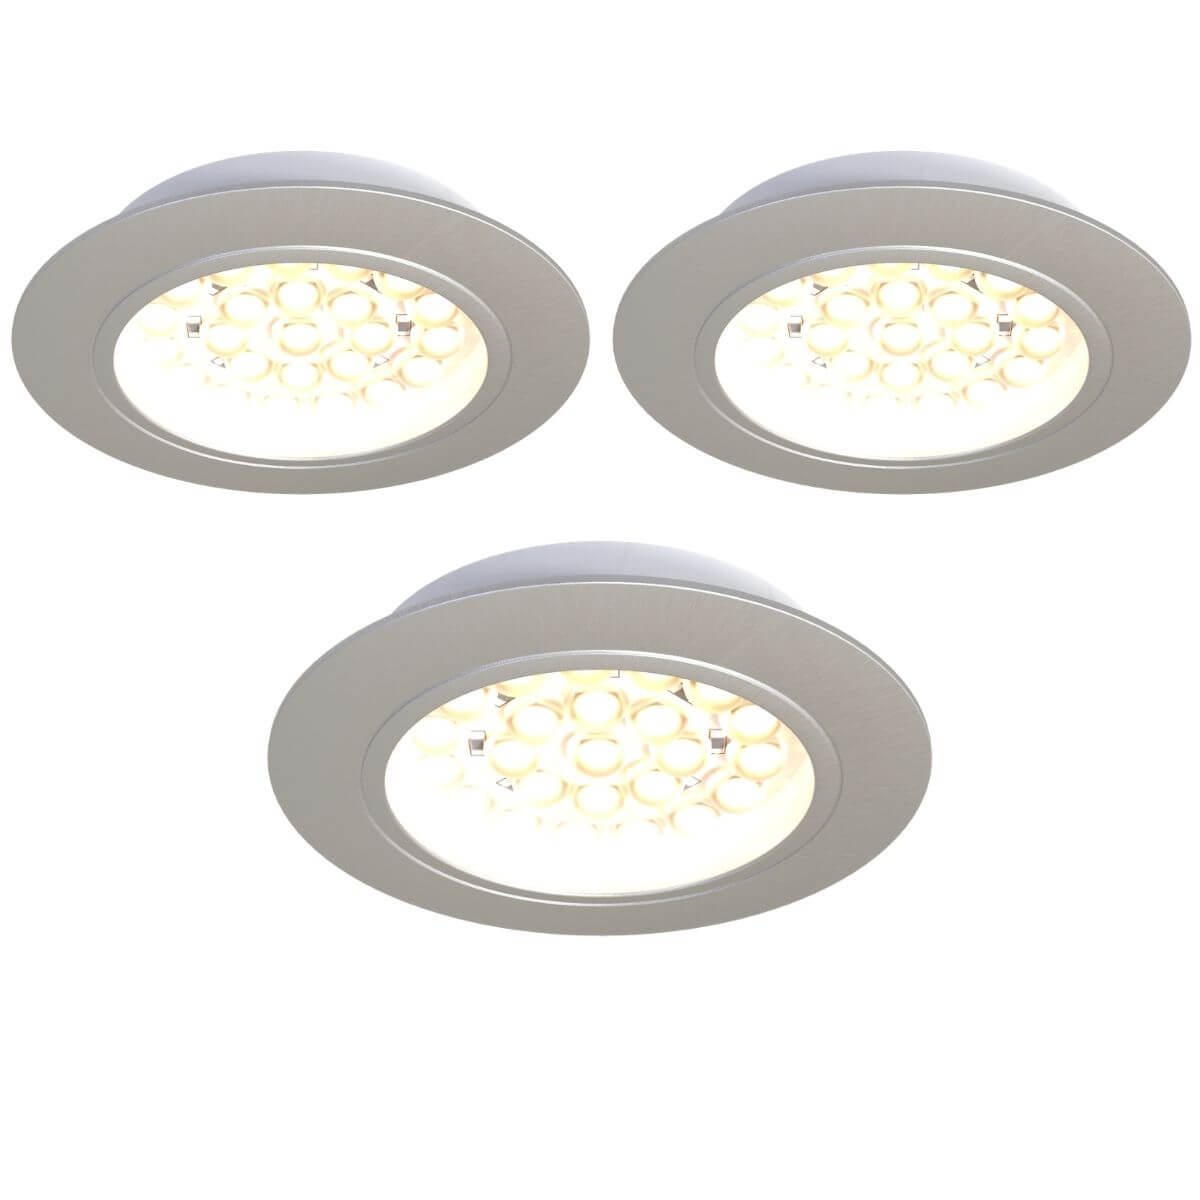 View 3 Pack Of Recessed LED Stainless Steel Under CabinetShelf Lights Transformer Cool or Warm White information